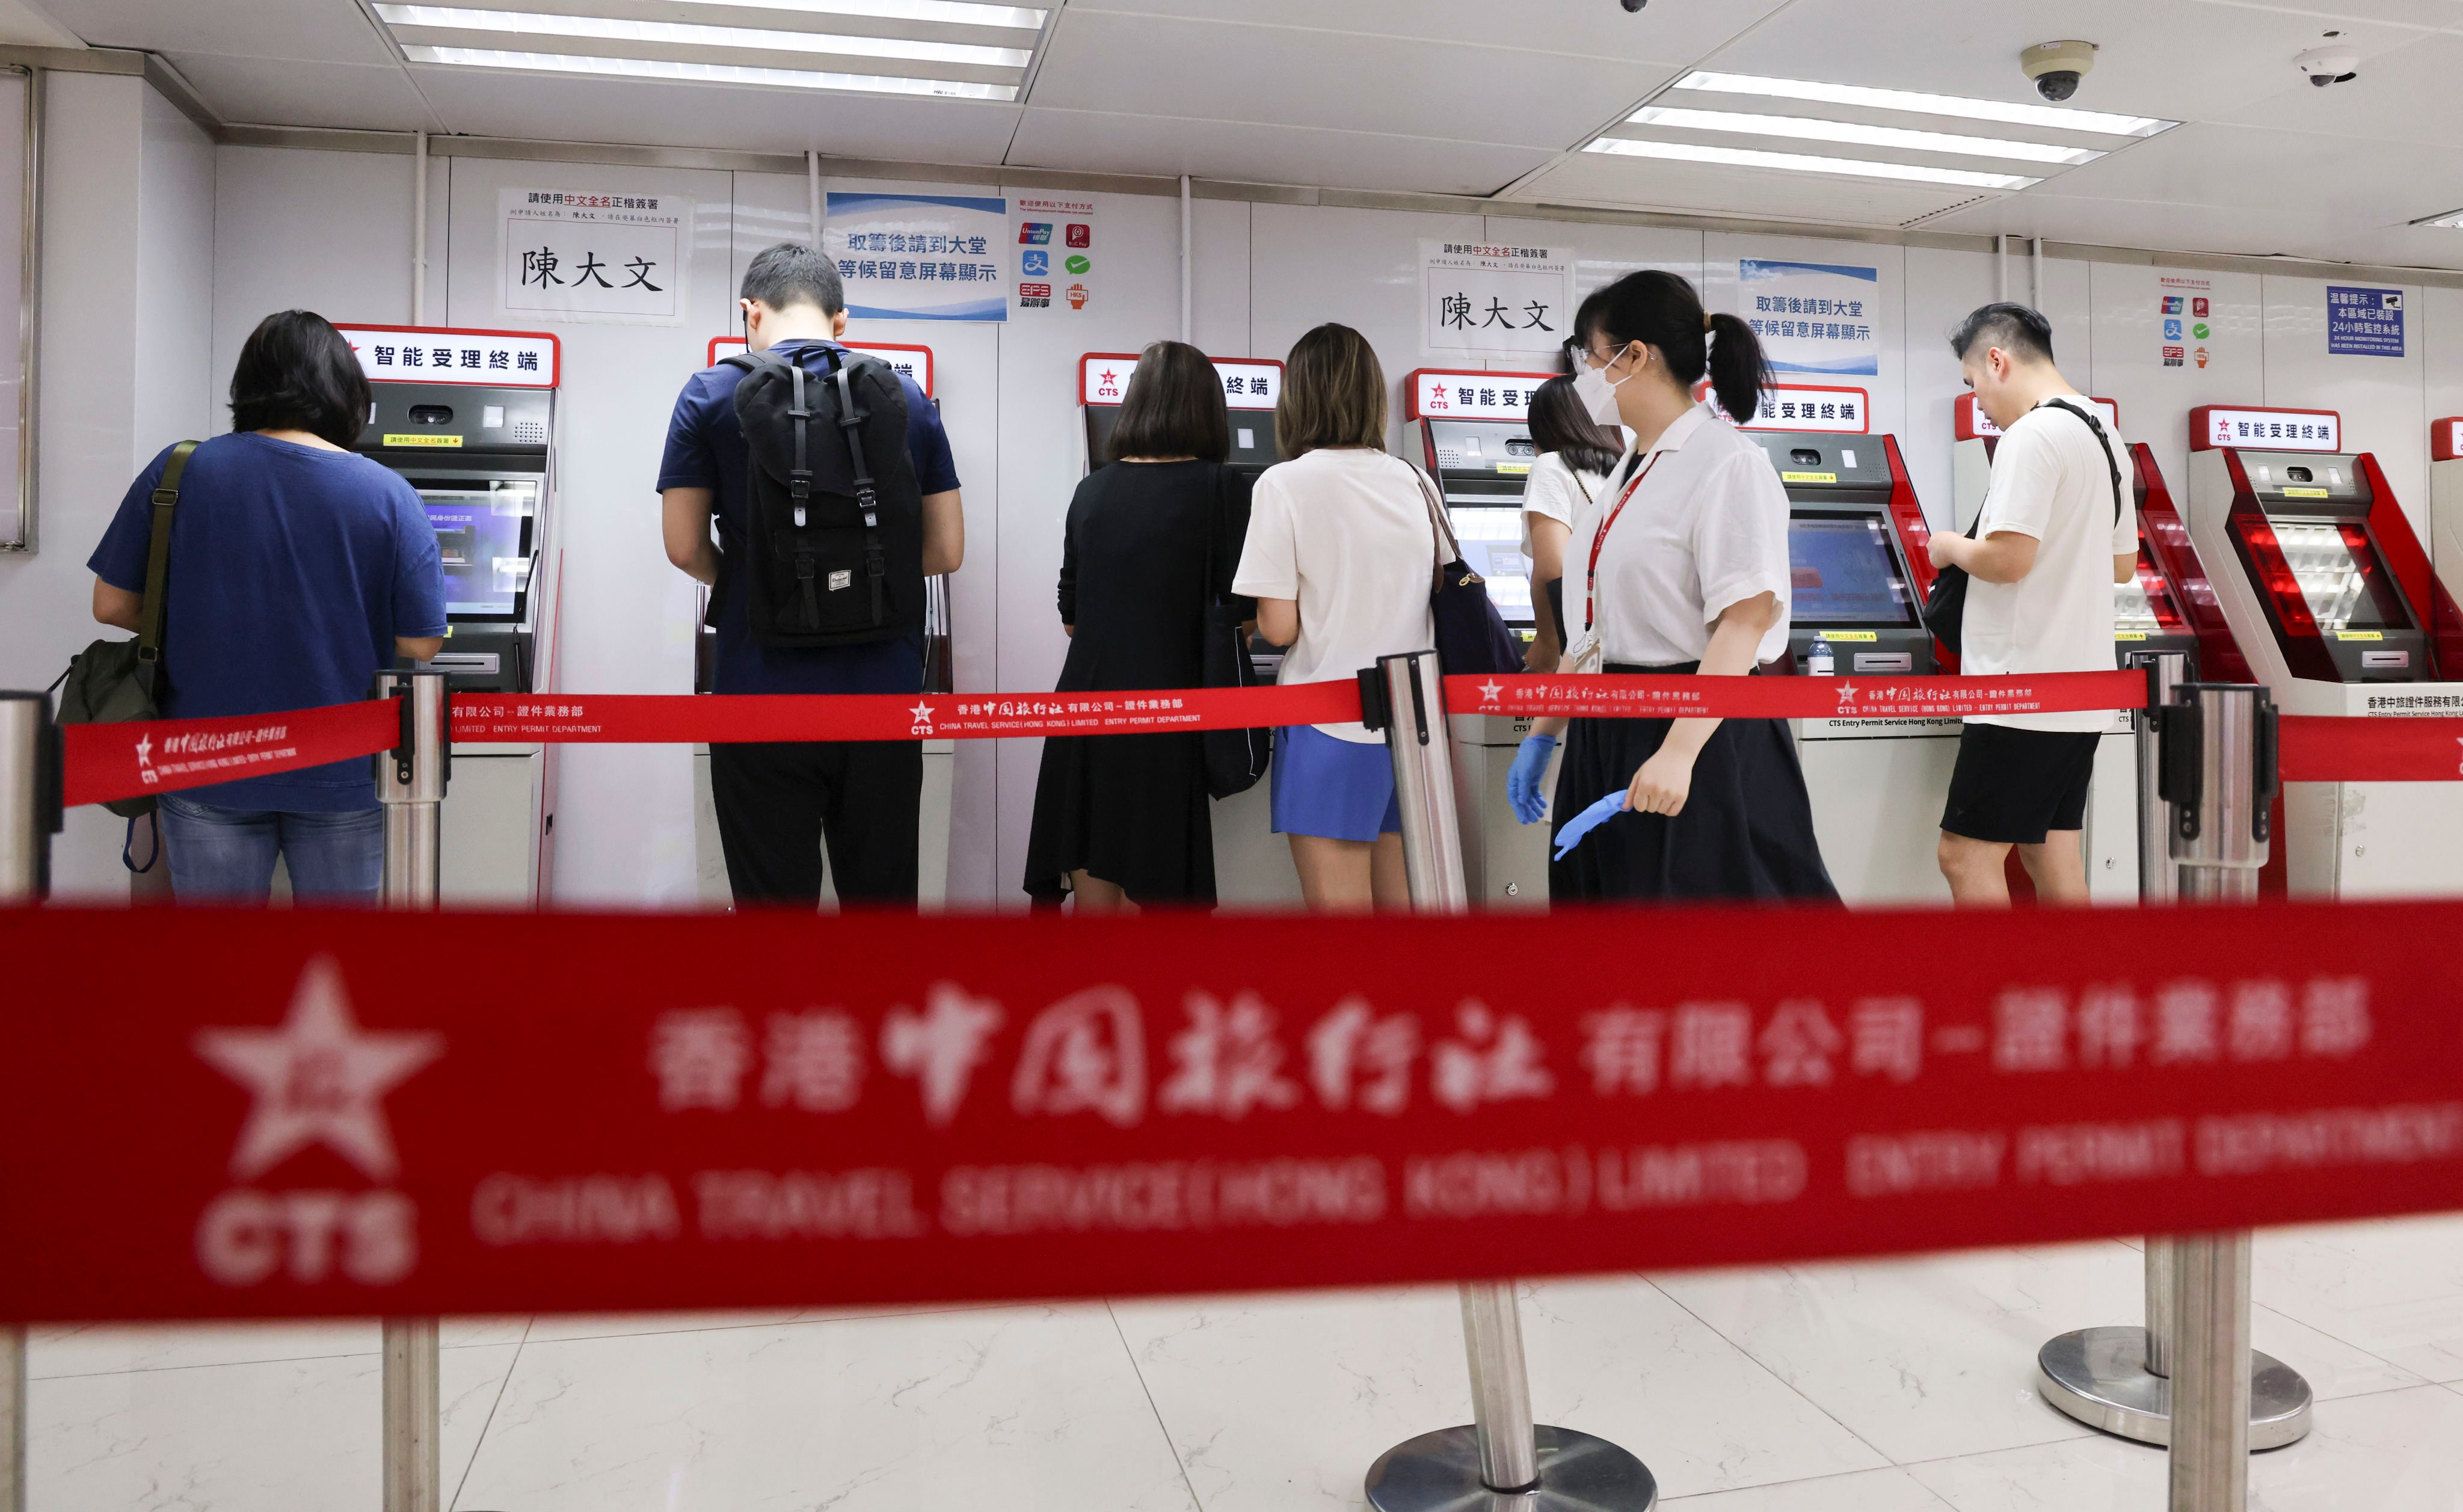 The new permit will allow non-Chinese permanent residents of Hong Kong and Macau to visit the mainland for short-term investment, family trips, tourism, business, seminars and exchanges multiple times for a period of up to five years. Photo: Jelly Tse